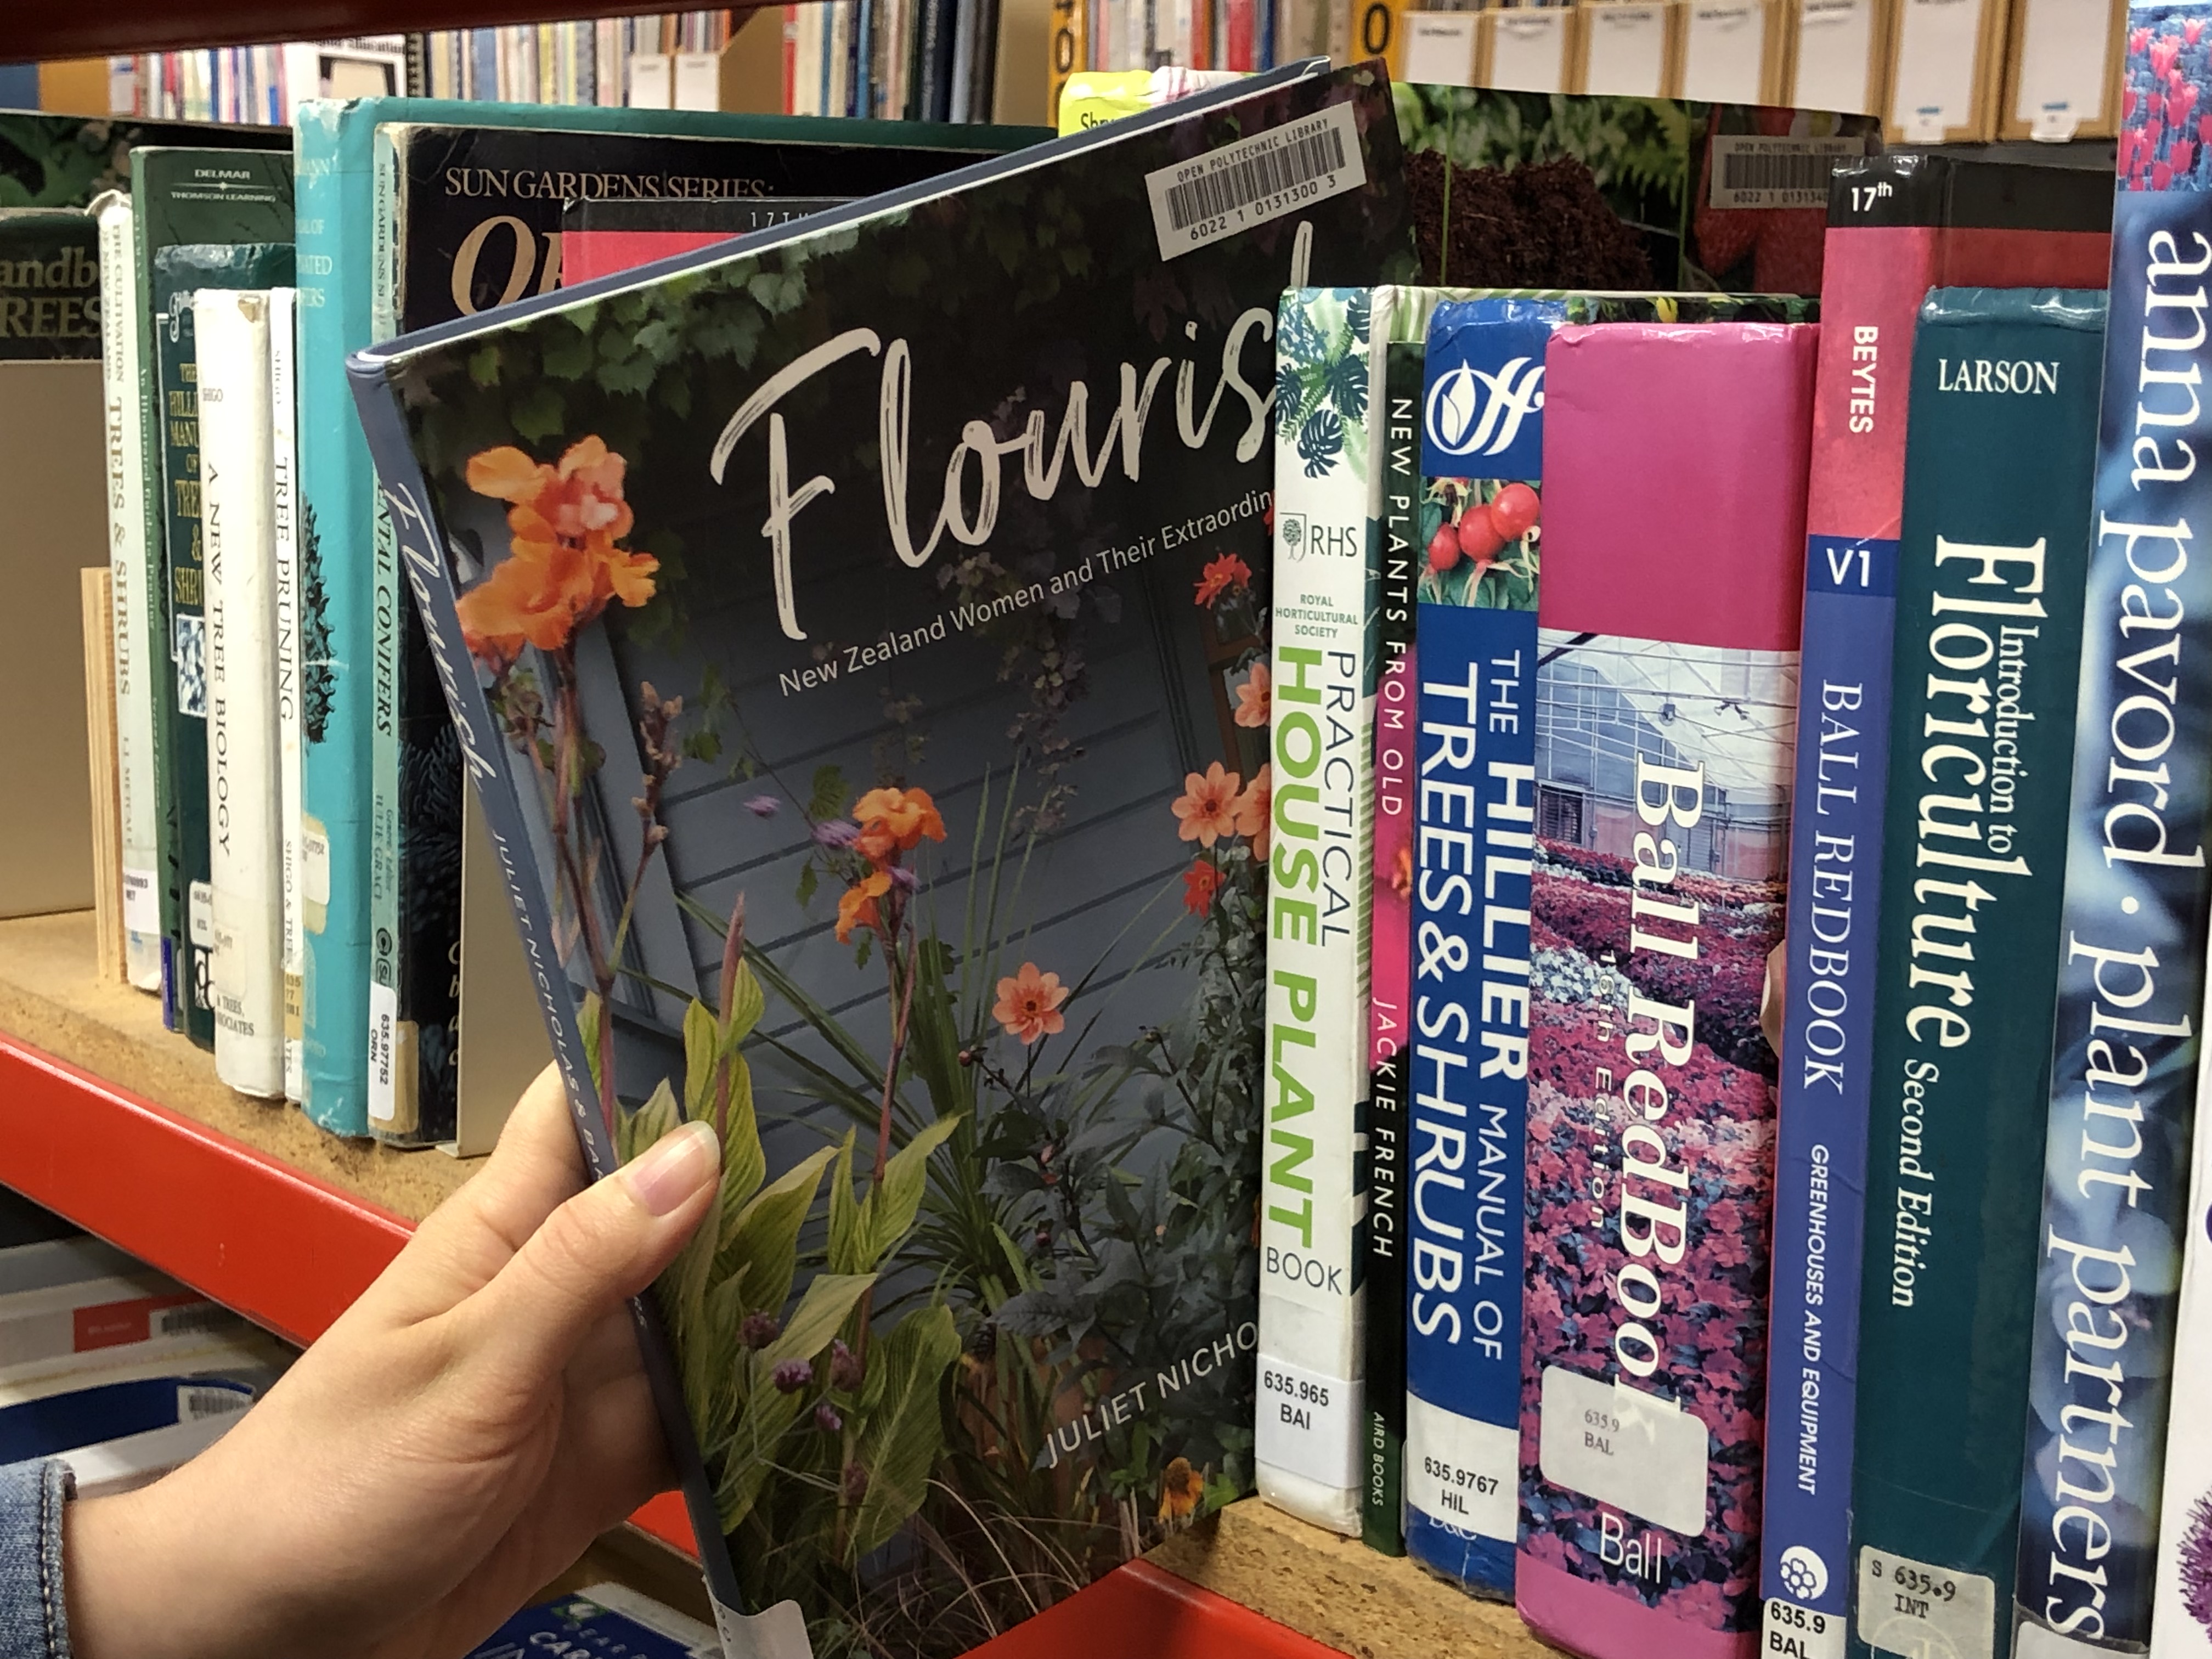 Selecting Flourish book from stacks